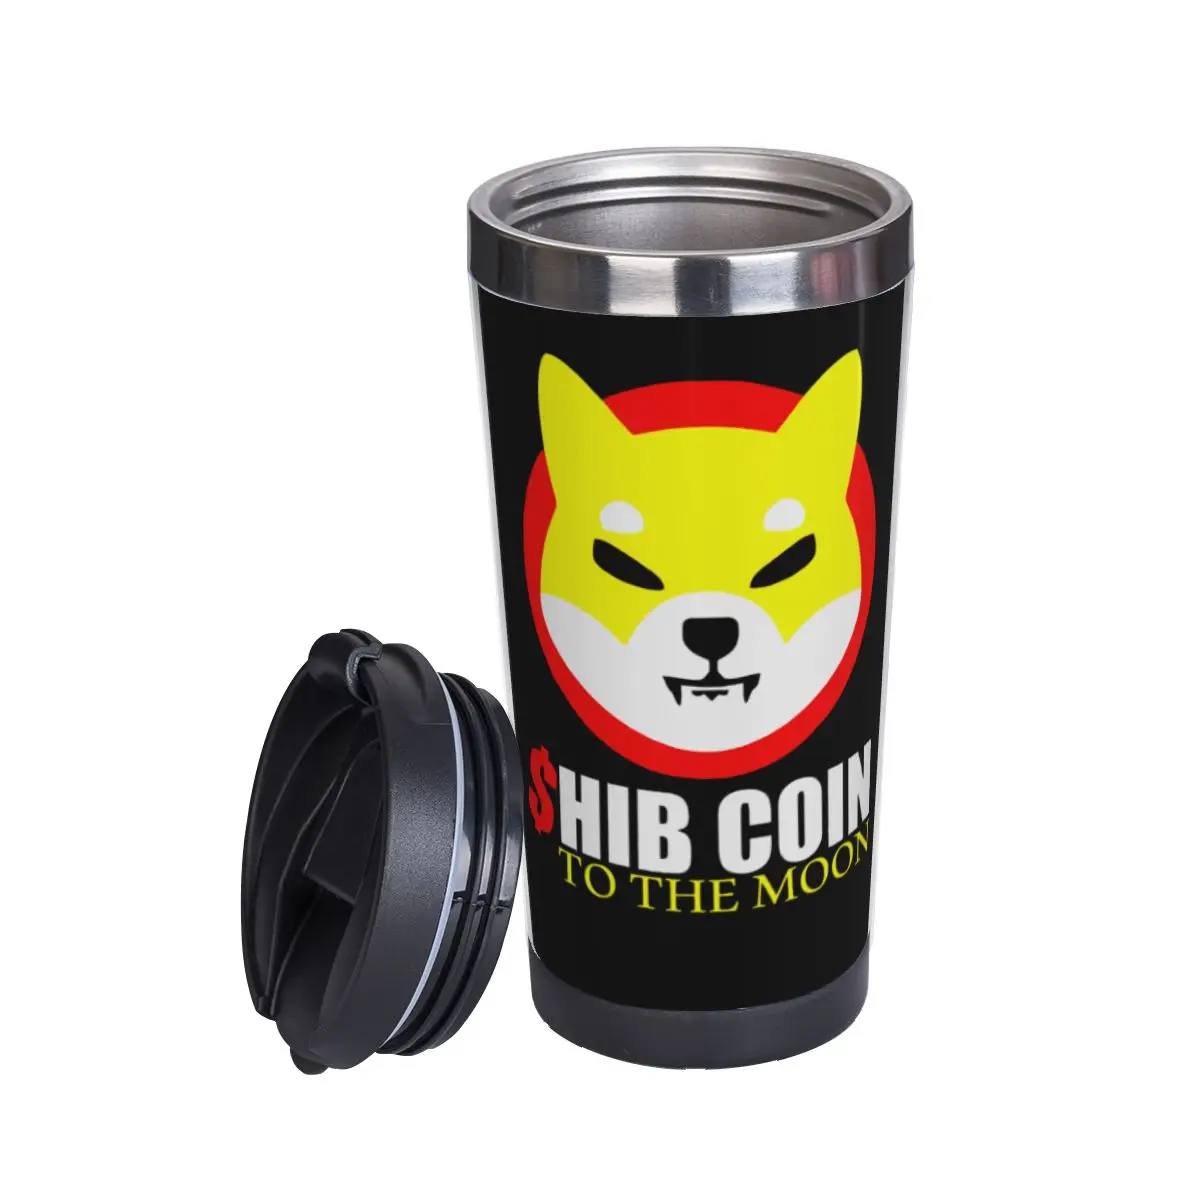 

Shiba Inu Token Crypto Shib Coin To The Moon Cryptocurrency Double Insulated Water Cup Top Quality Thermos bottle Mug tea cups